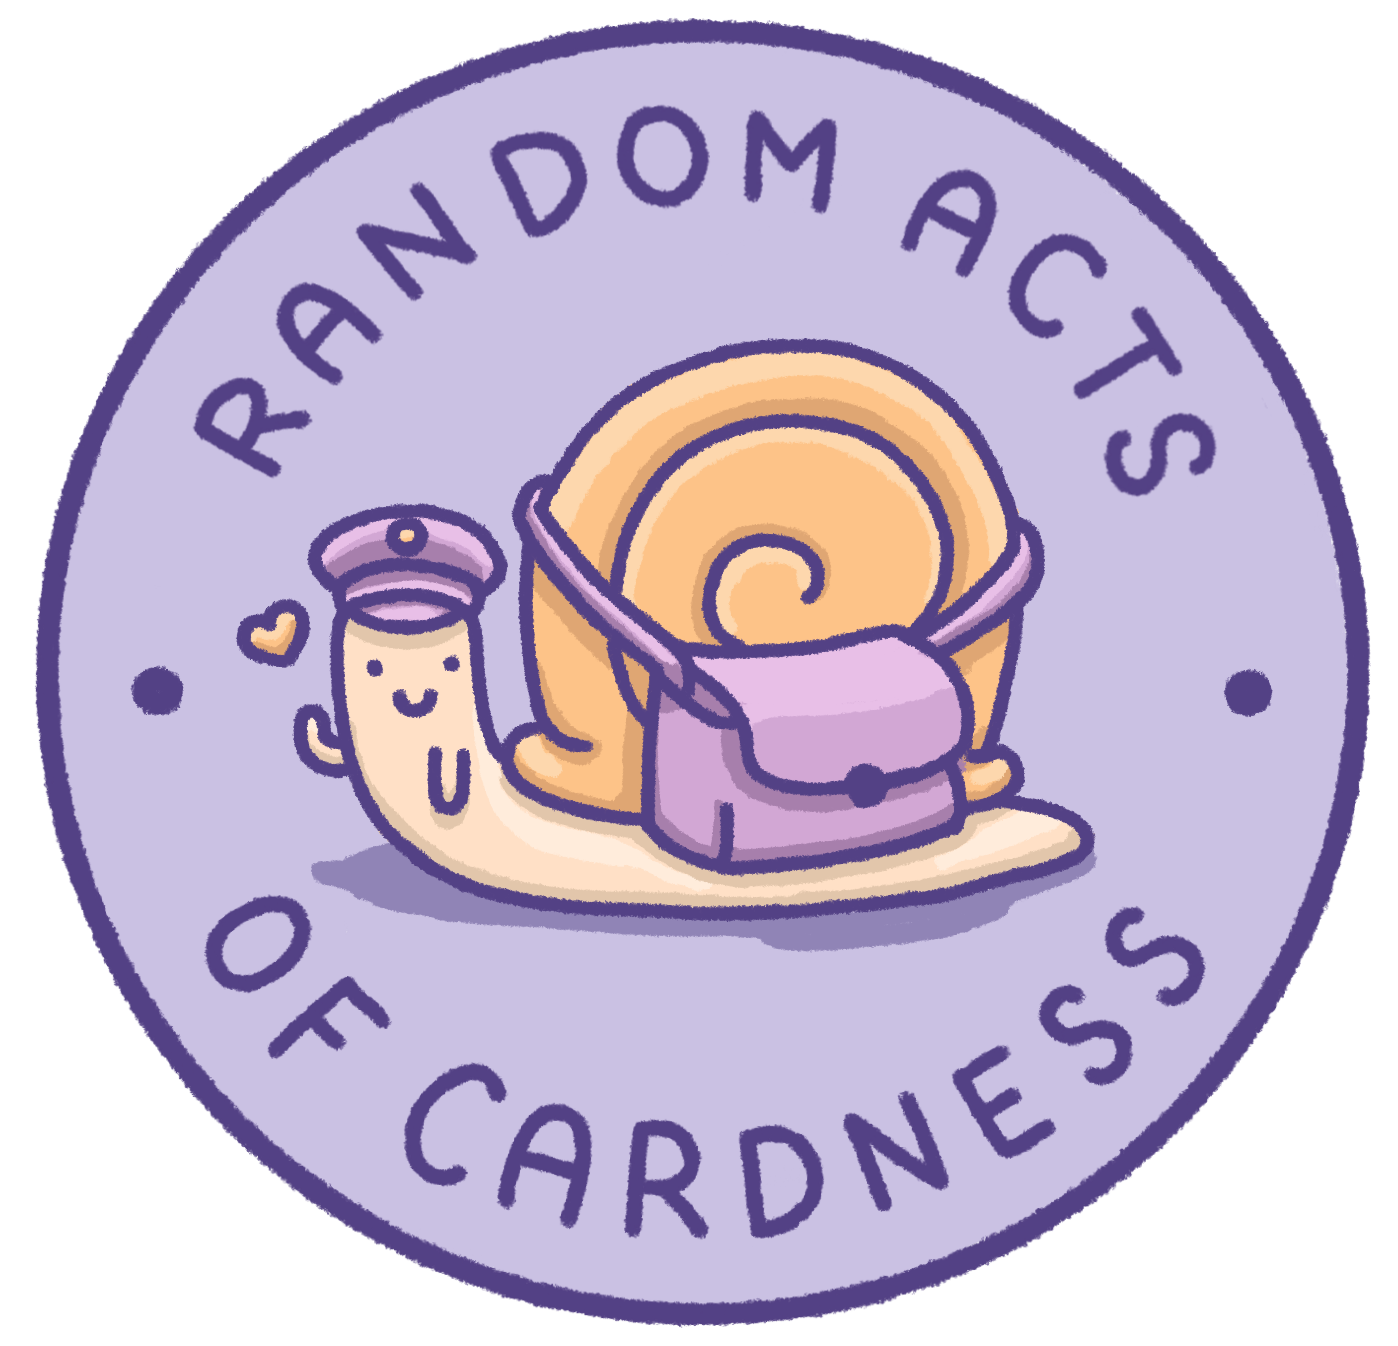 Random Acts of Cardness